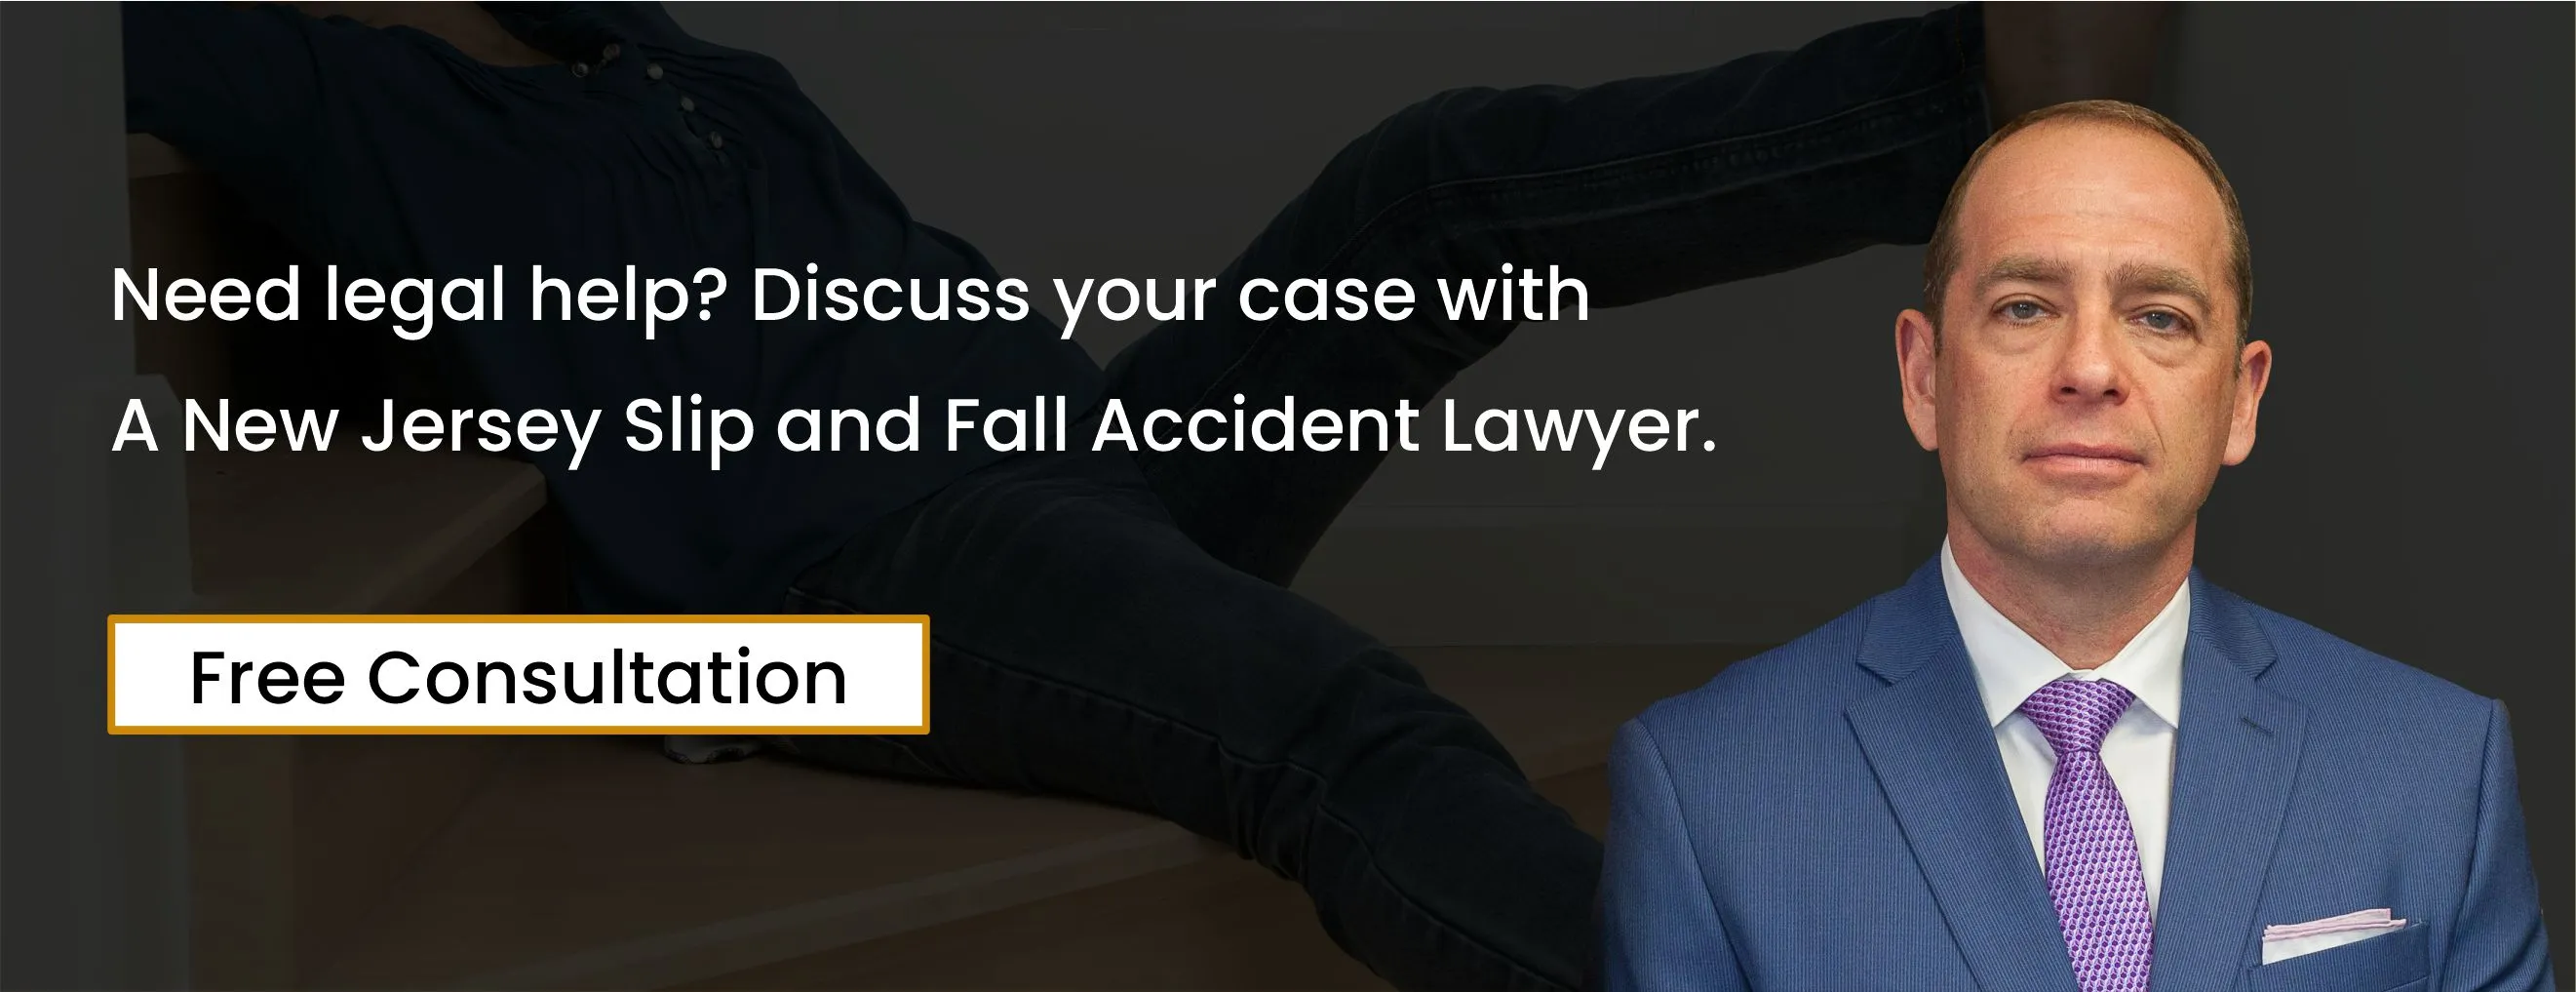 new jersey slip and fall accident lawyer